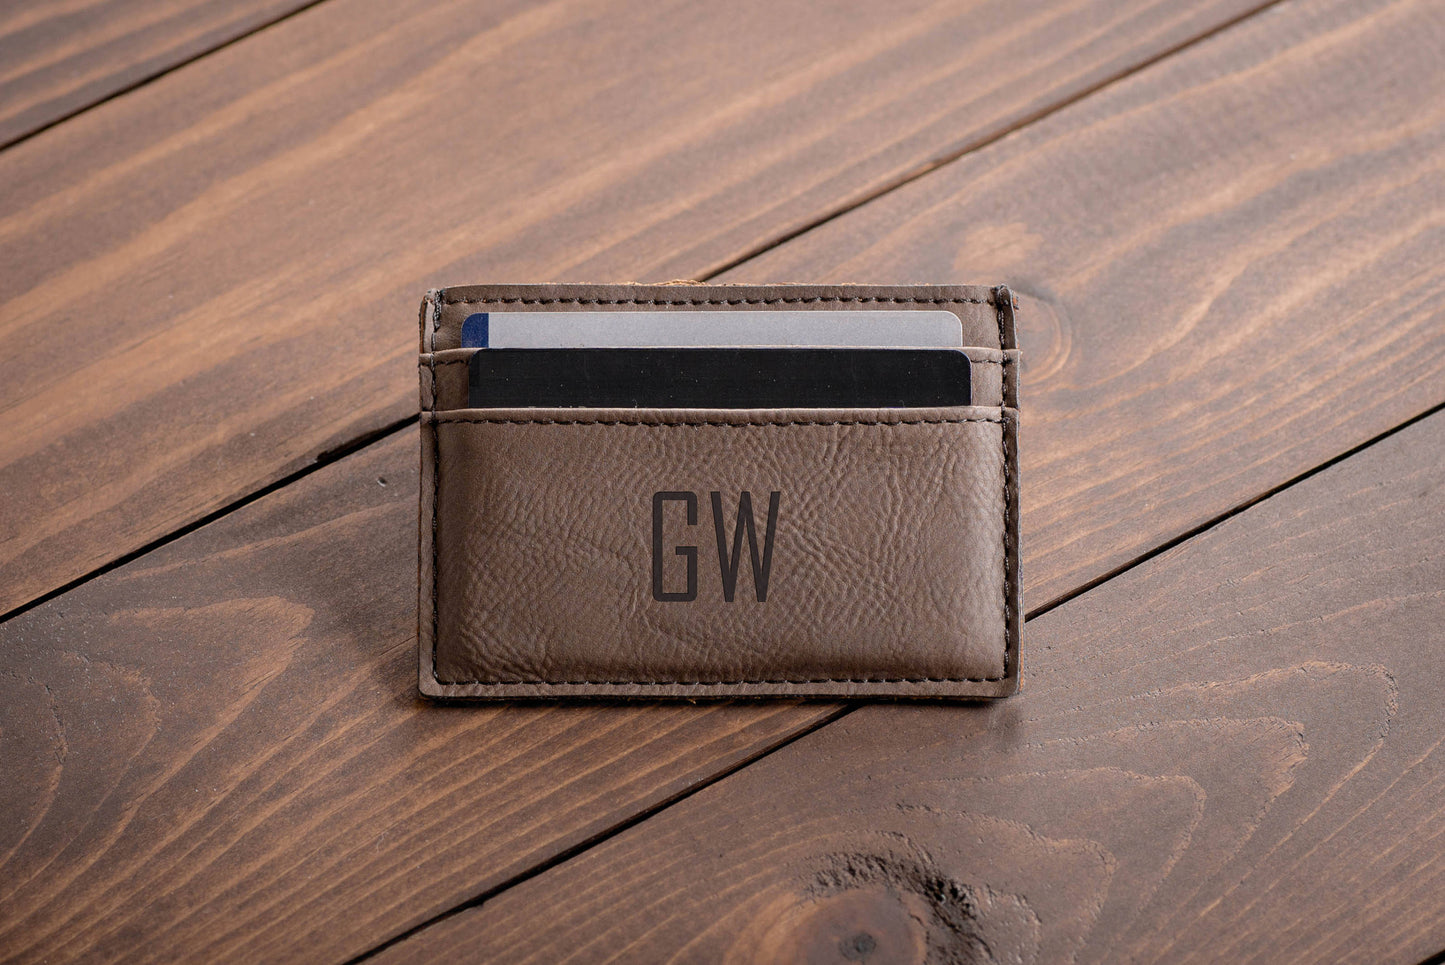 Groomsman Gift - Personalized Money Clip